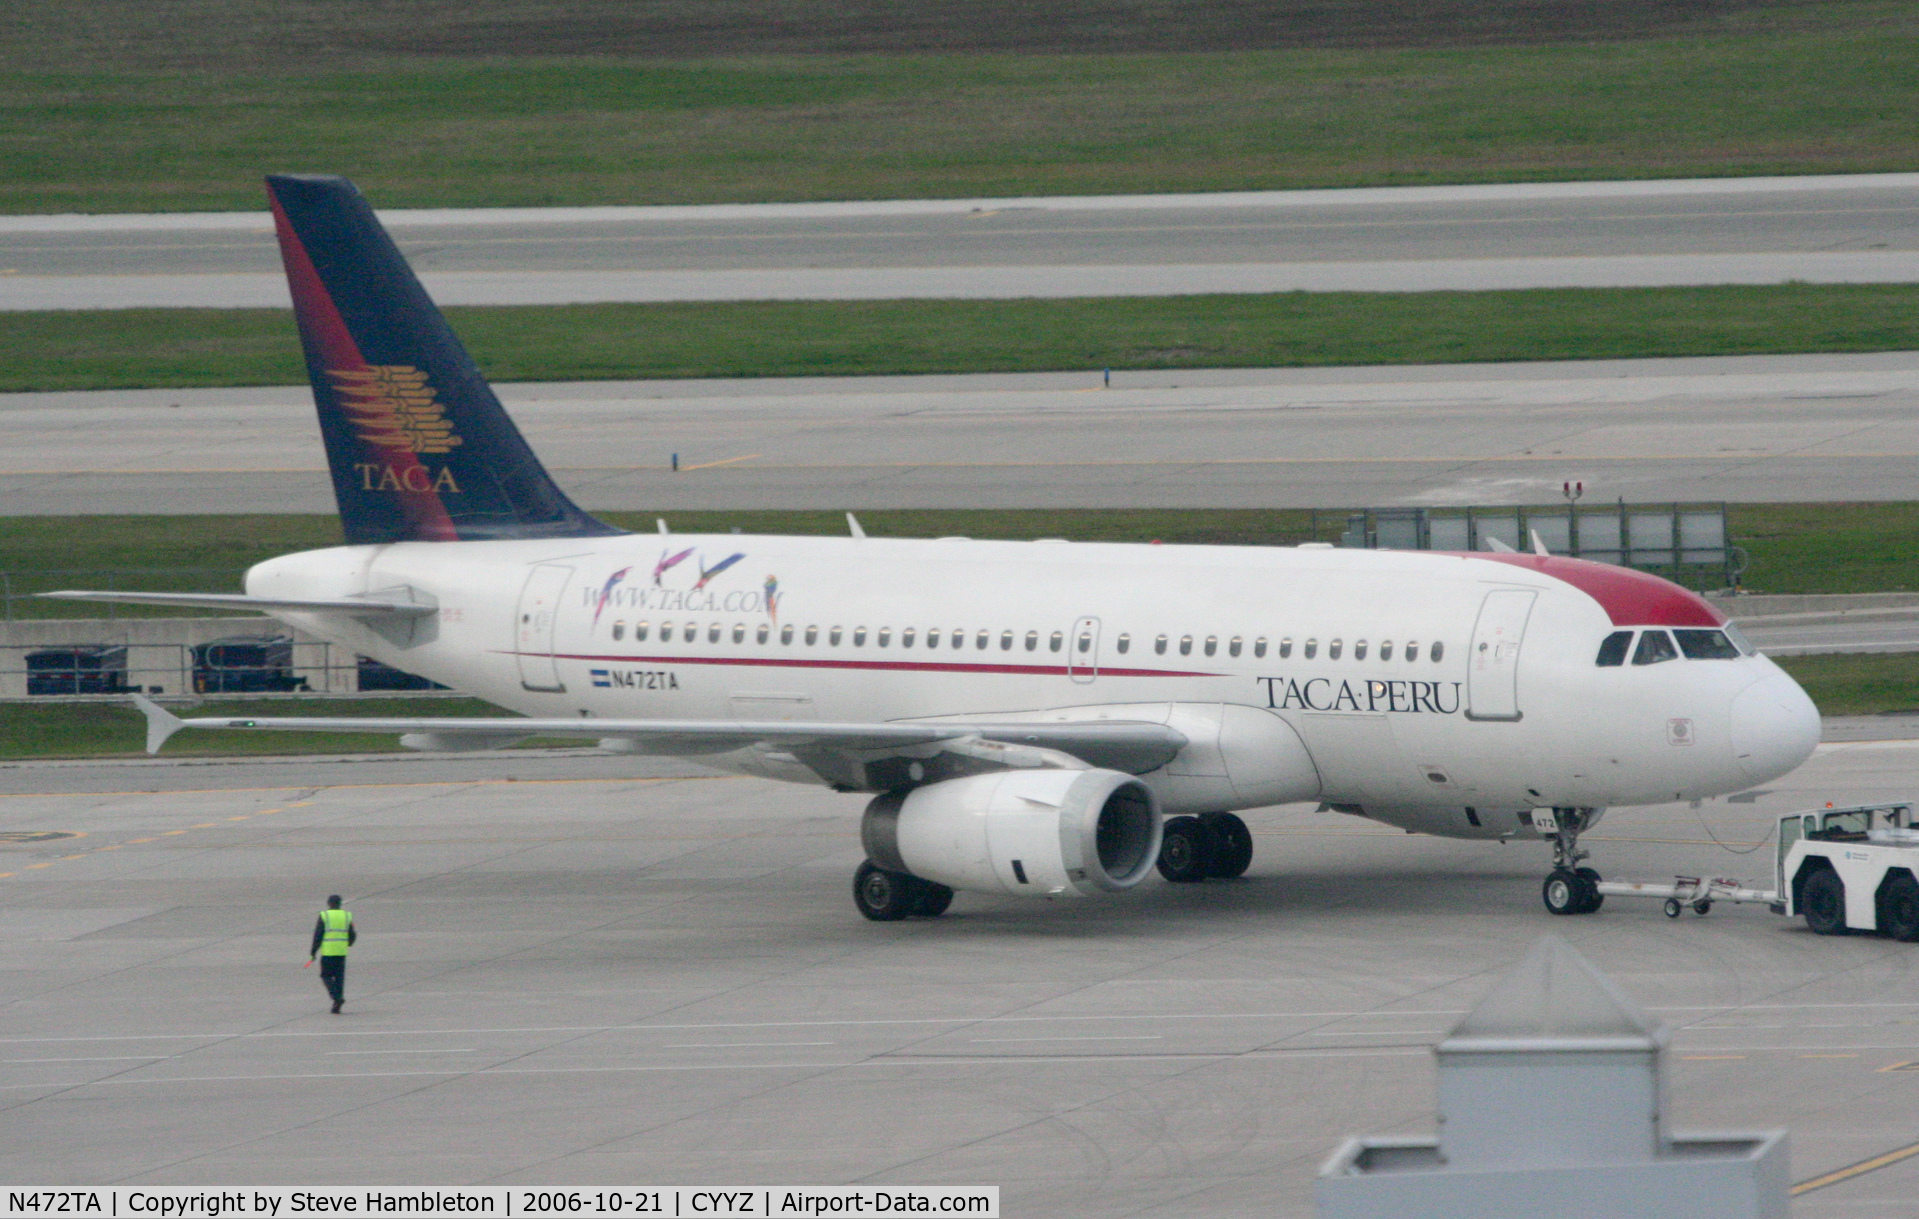 N472TA, 1999 Airbus A319-132 C/N 1113, Taken from the bedroom window of the Sheraton Hotel